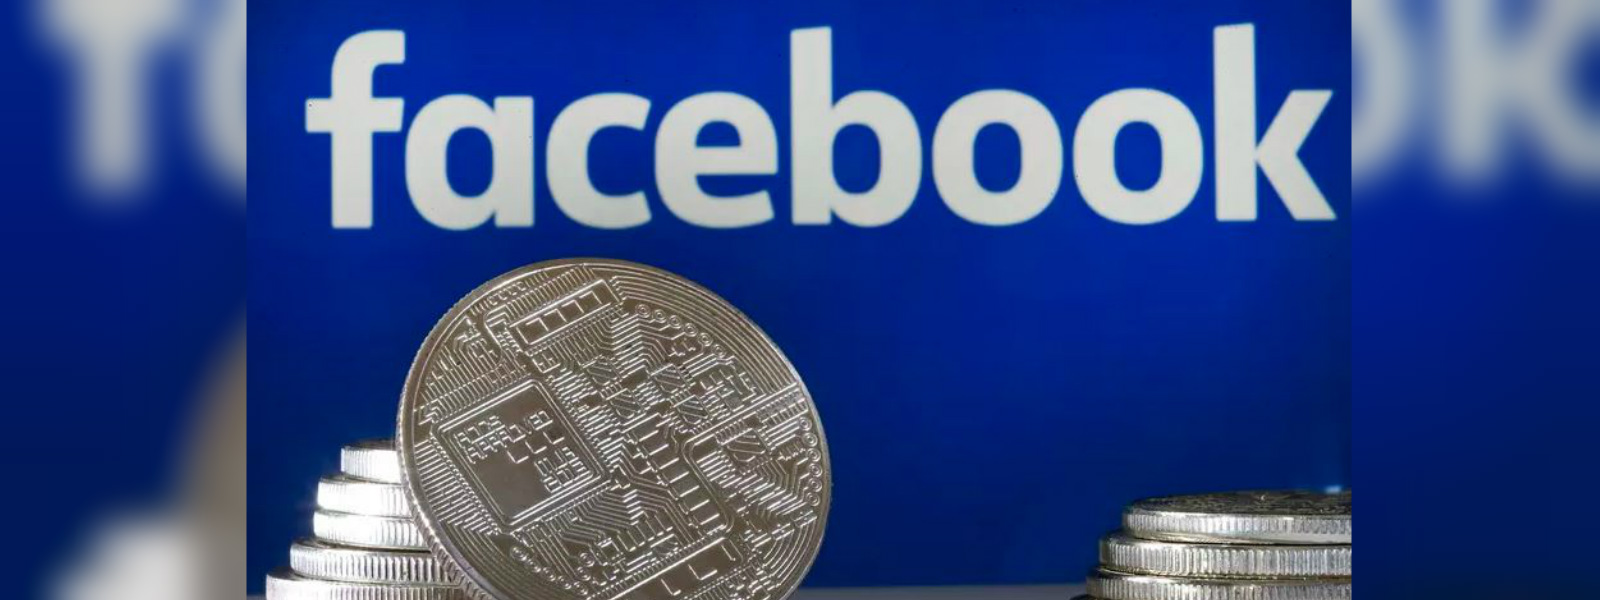 Facebook reveals Libra cryptocurrency, with lofty goals